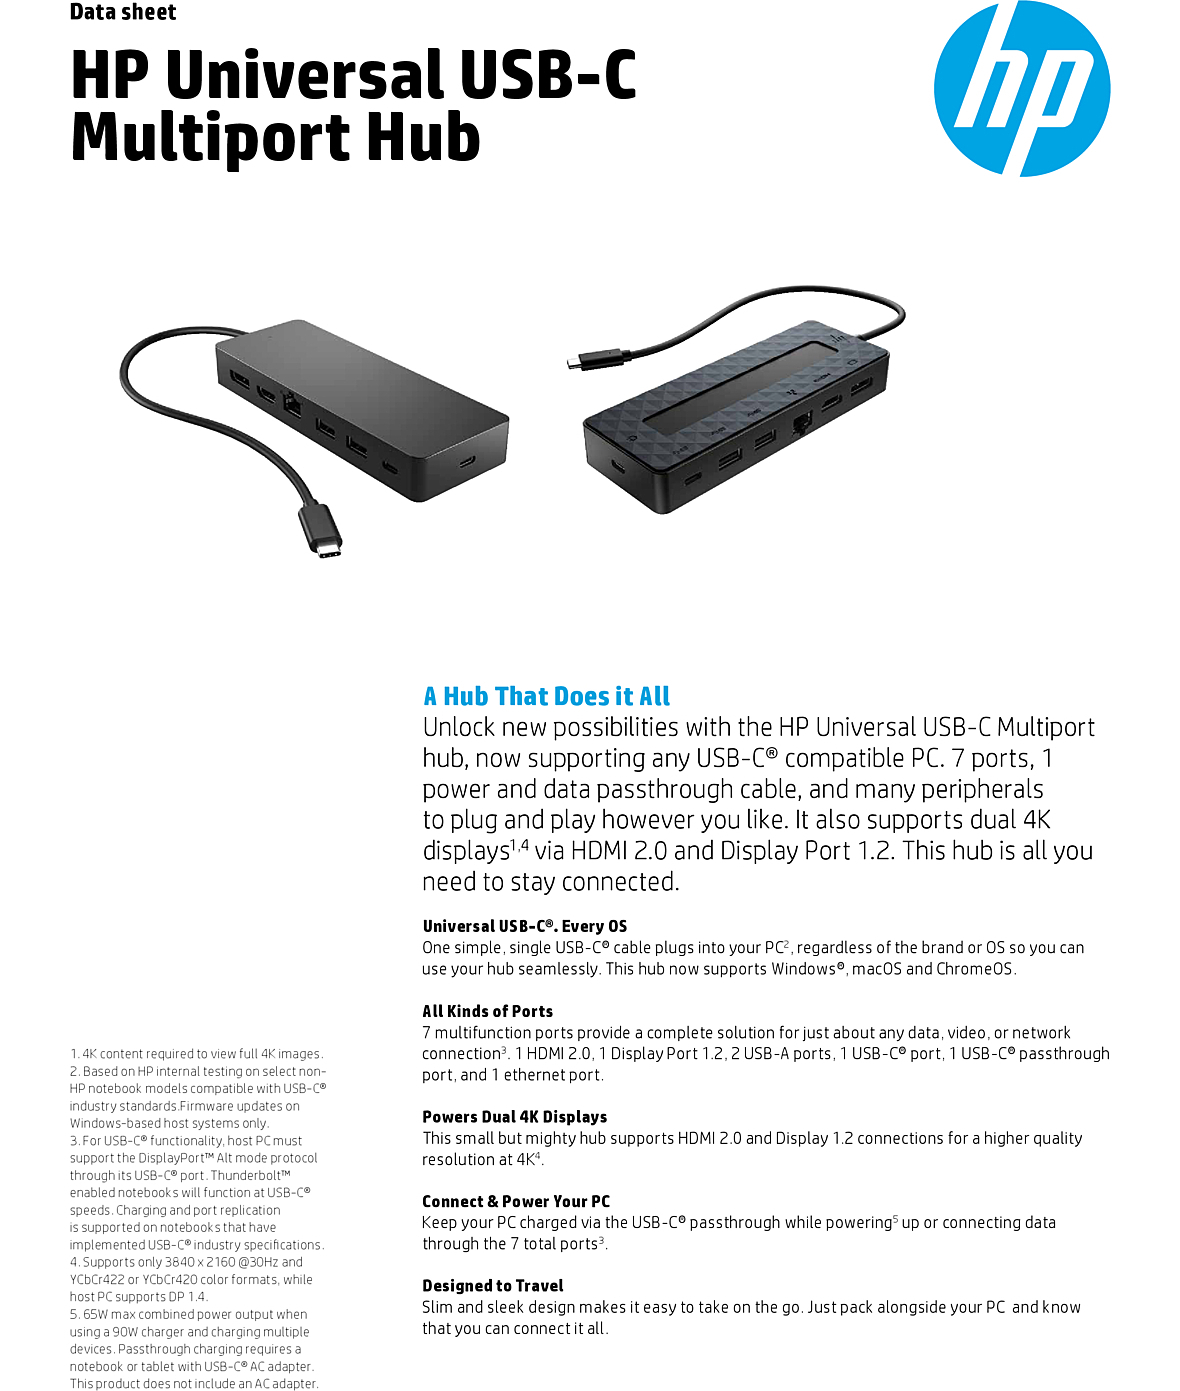 Concentrateur multiport HP USB-C universel 50H55AA